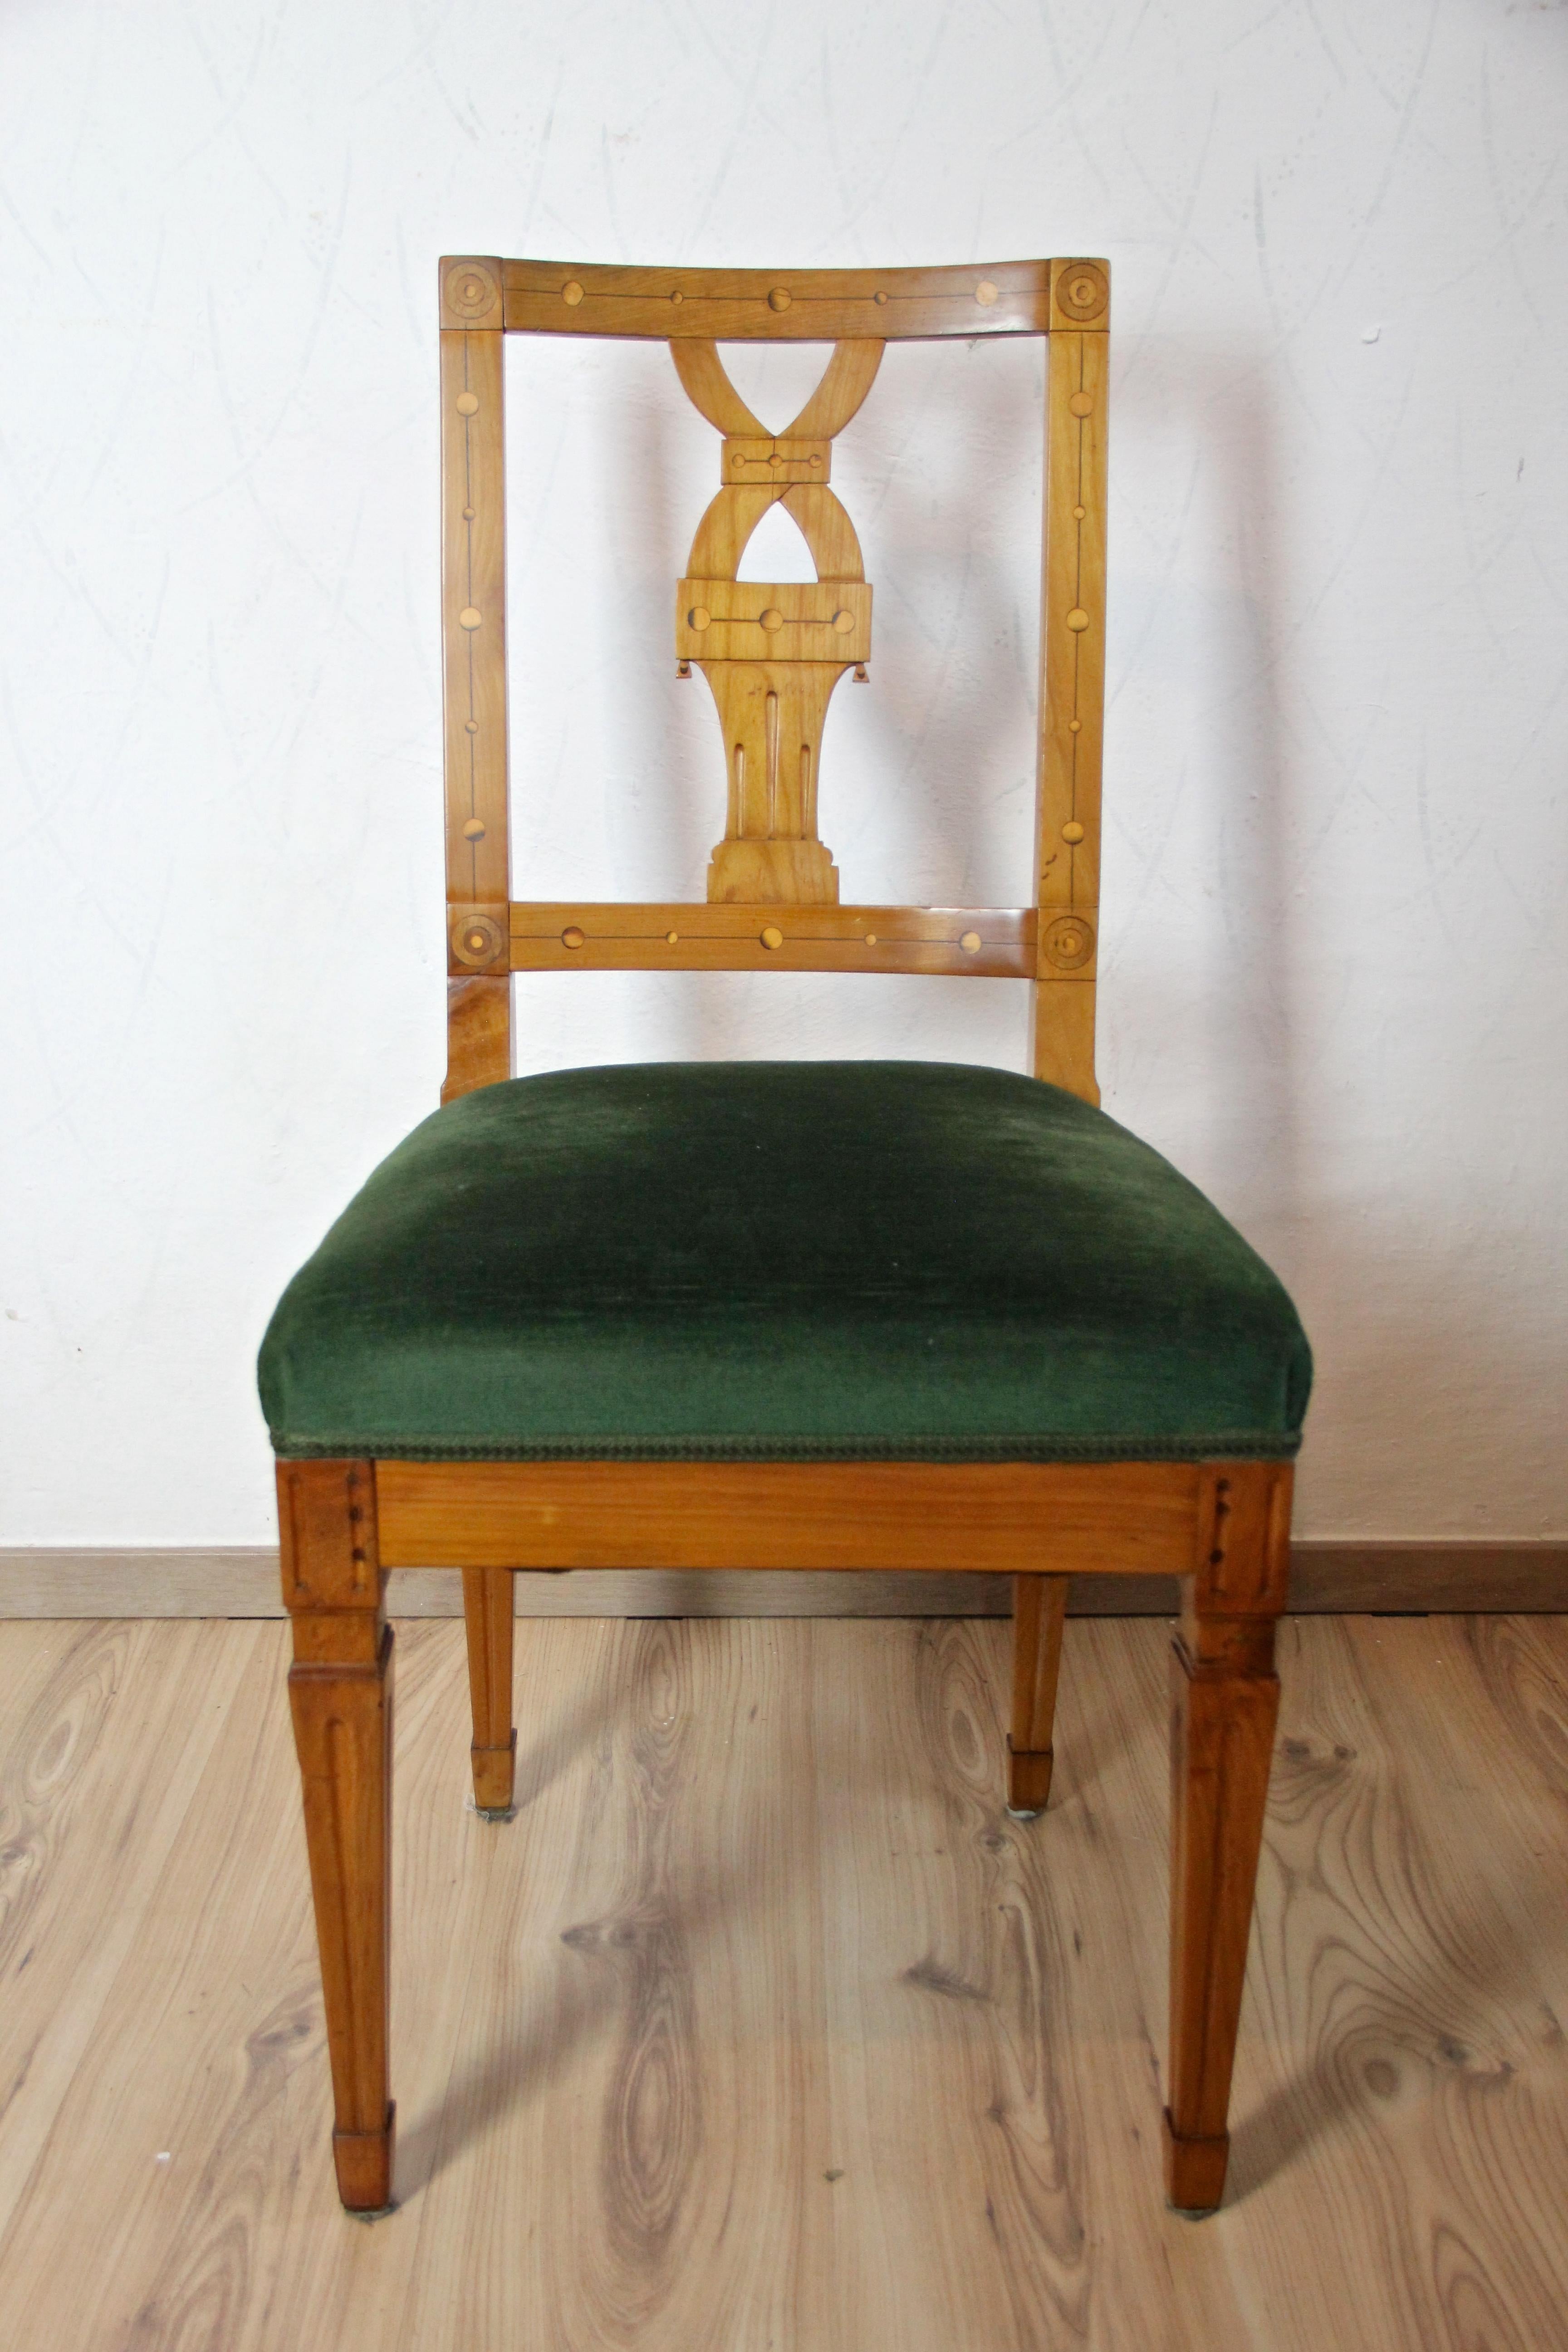 Unique 18th century cherrywood chair from the period of Emperor Joseph II. of Austria, the son of Empress Maria Theresia, circa 1790. Made of solid cherrywood, this decorative chair was newly upholstered with green fabric. The artfully made back is